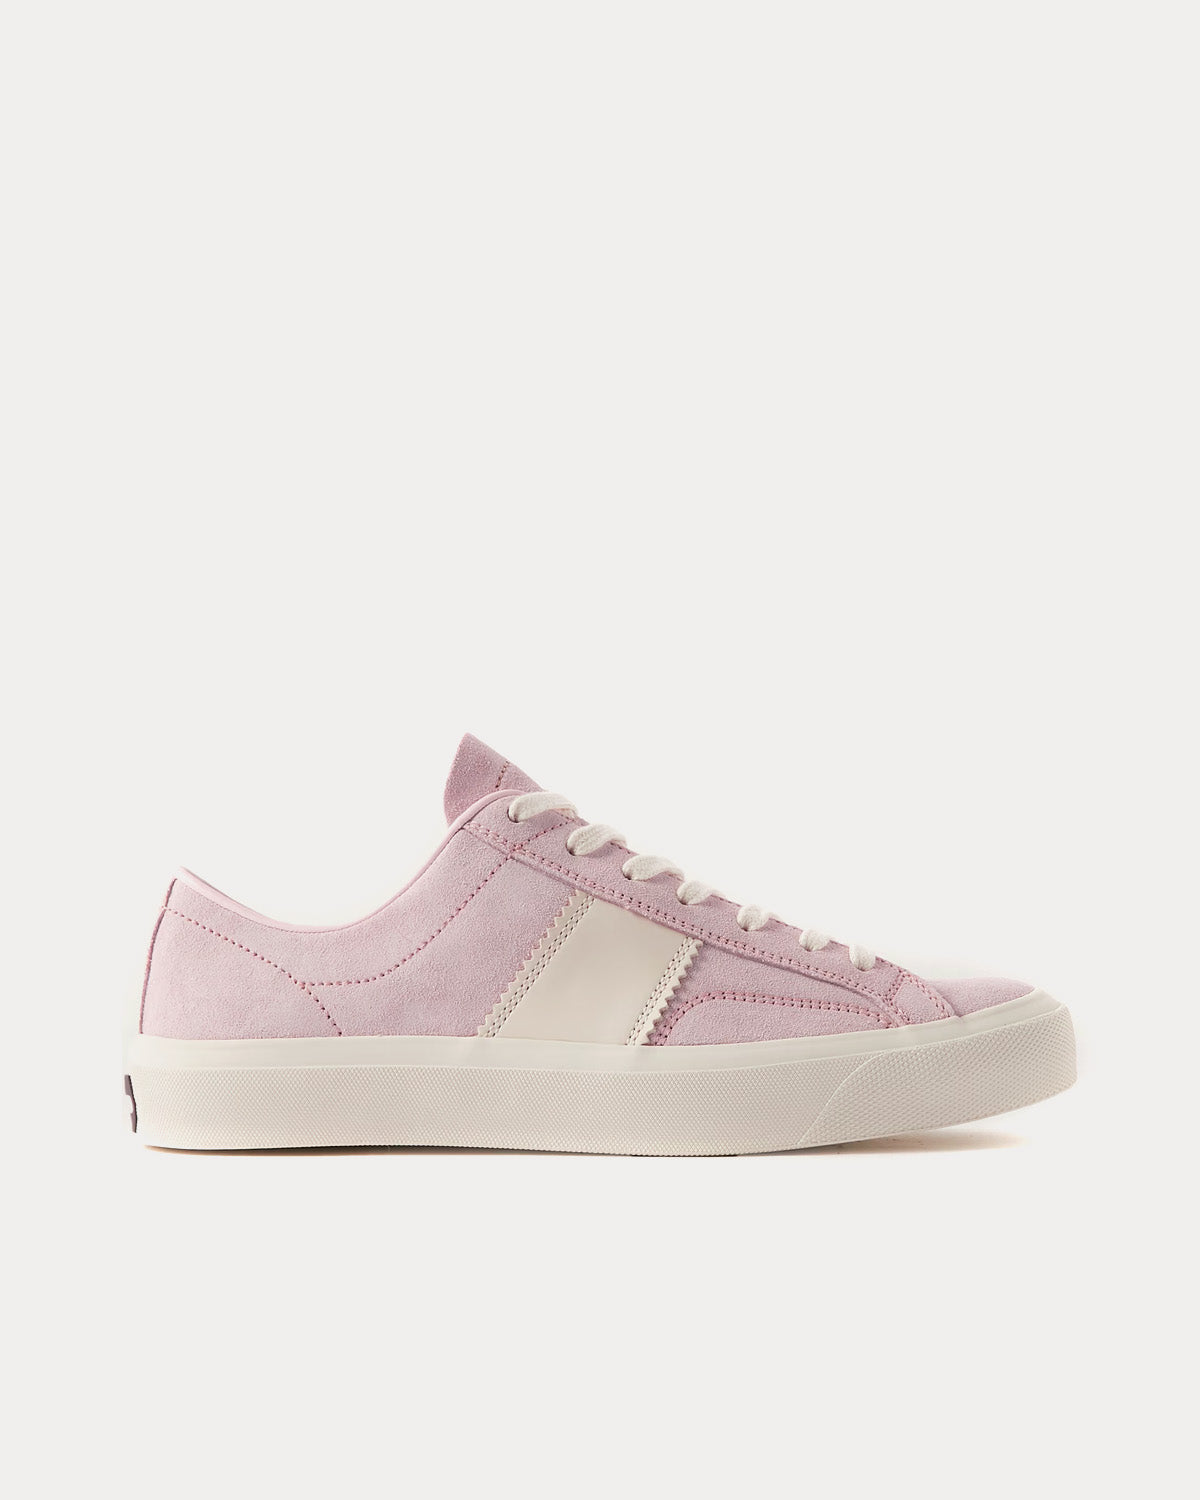 Tom Ford Cambridge Suede & Leather Pink Low Top Sneakers - Sneak